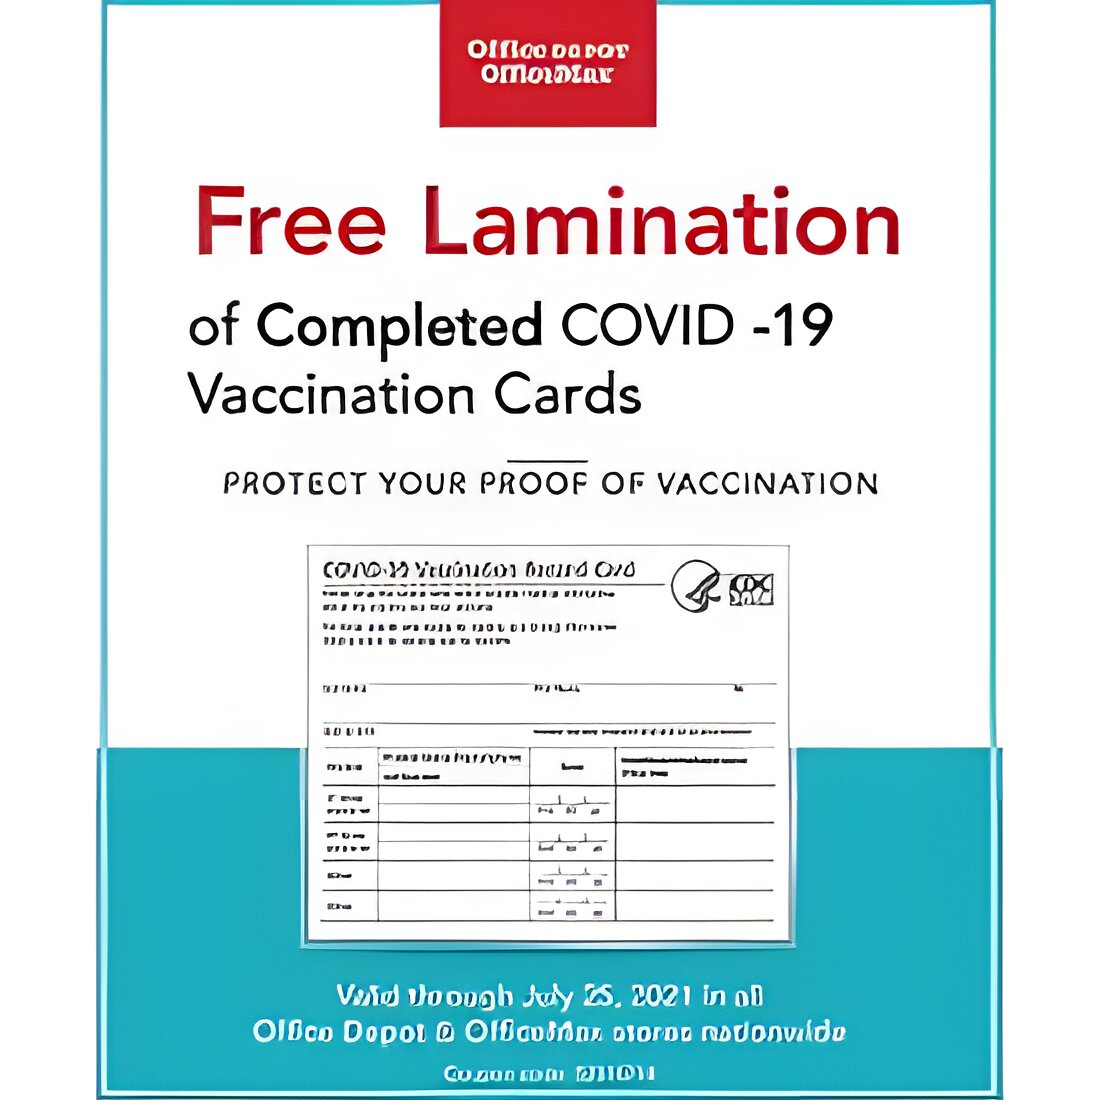 Free Lamination of Completed COVID-19 Vaccination Cards